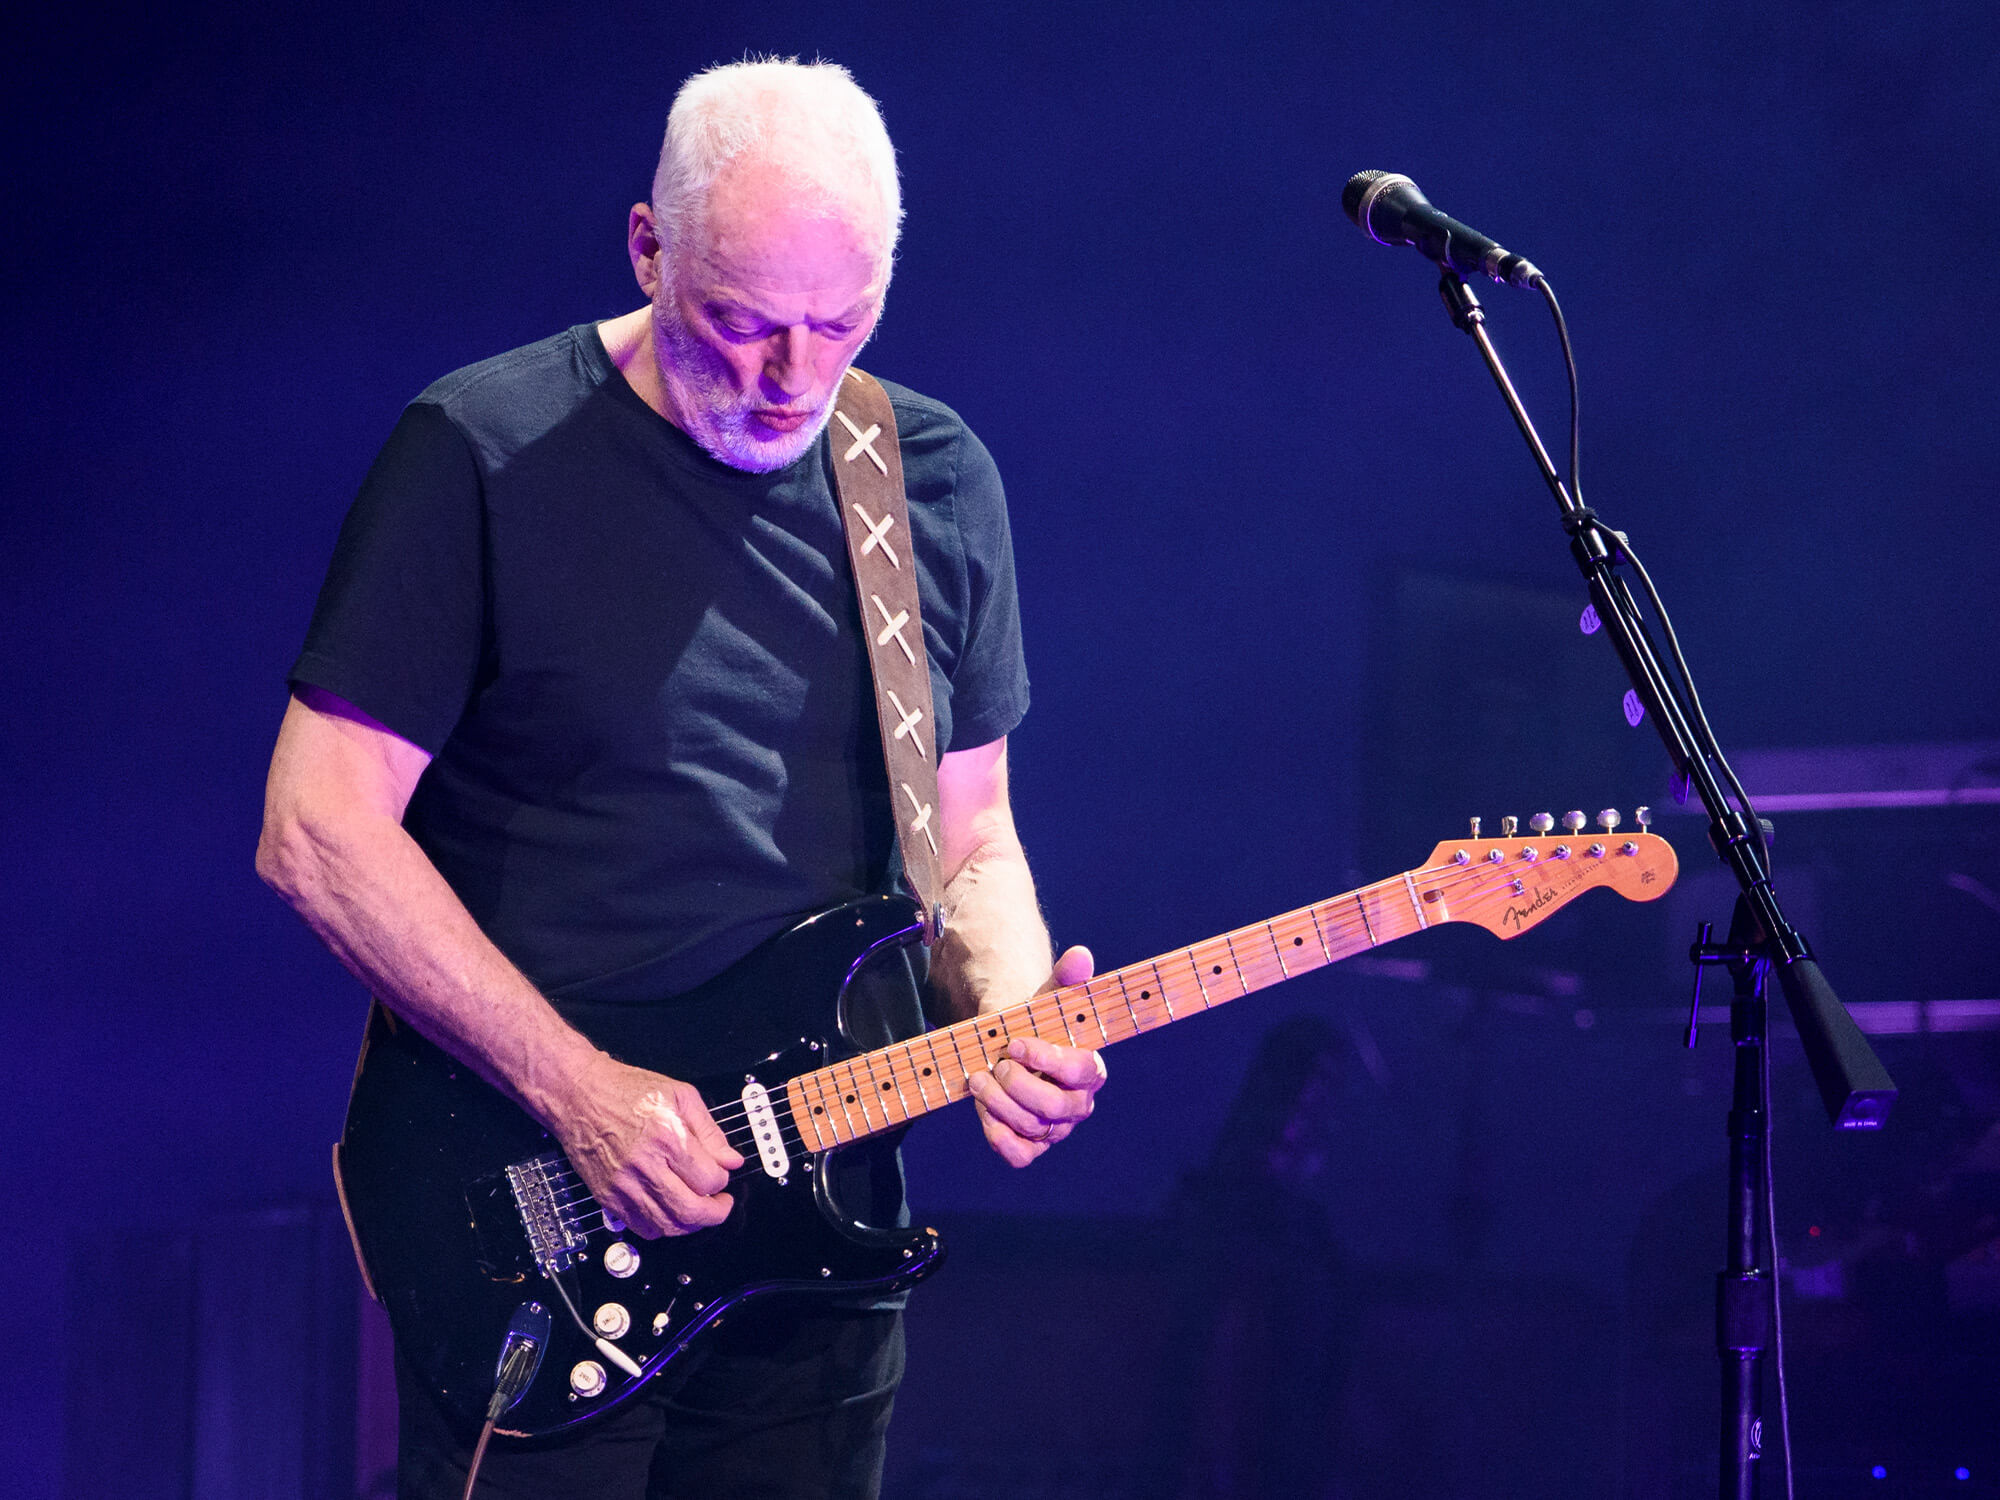 David Gilmour on stage playing guitar